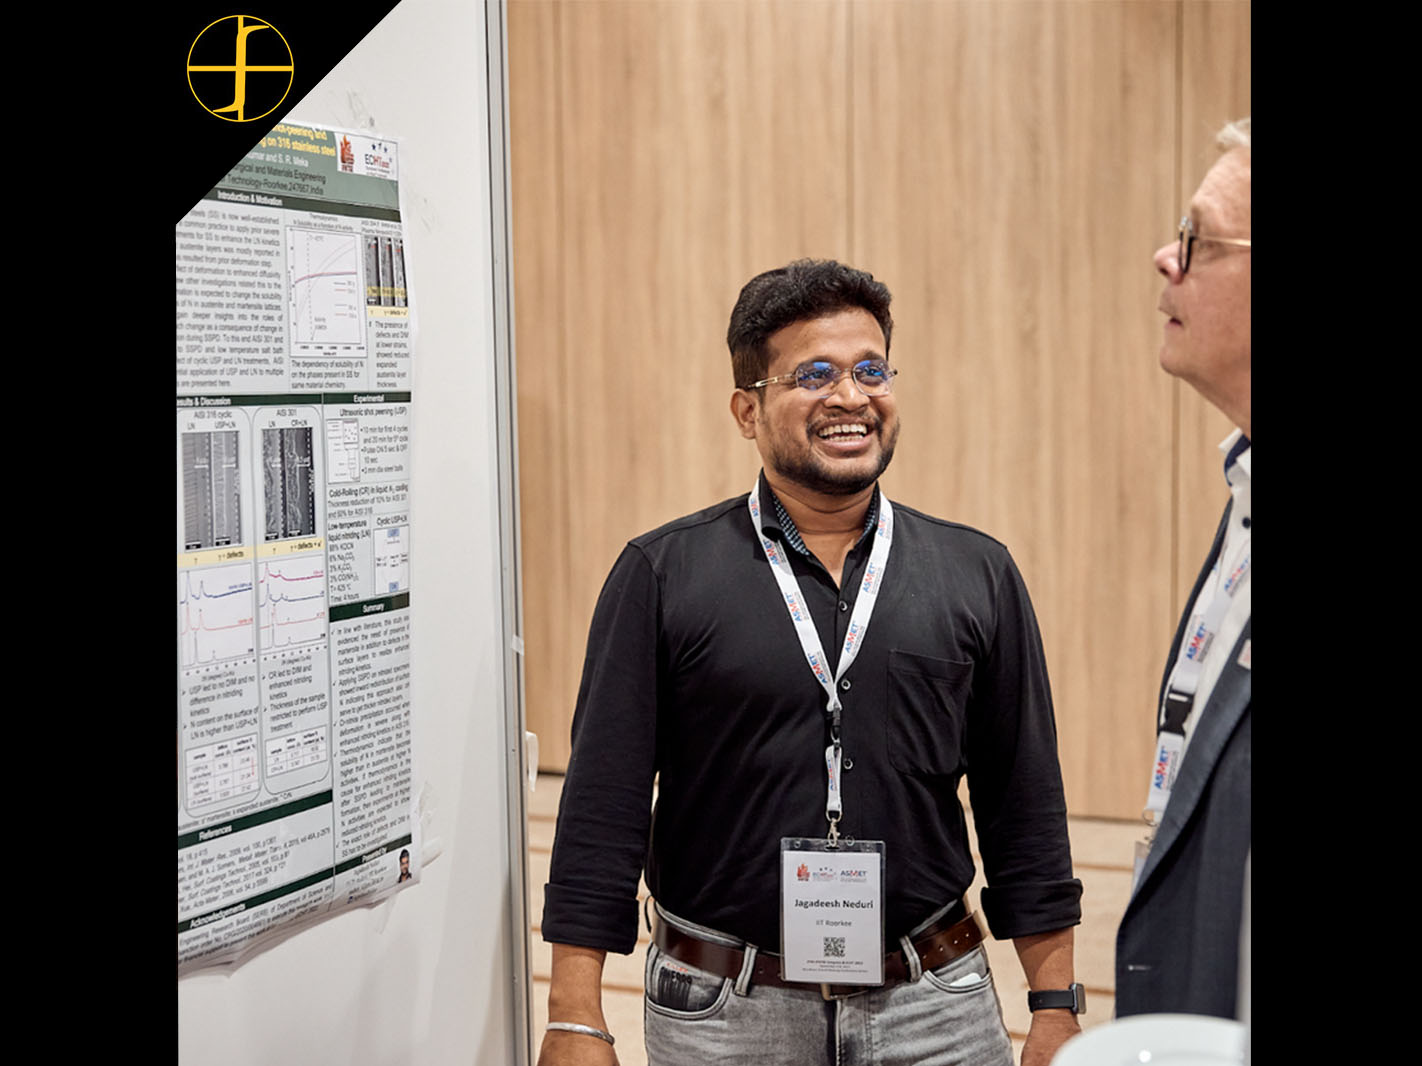 Fluxtrol Inc. Sponsors Heat Treatment Poster Competition at the 2022 IFHTSE World Congress in Austria